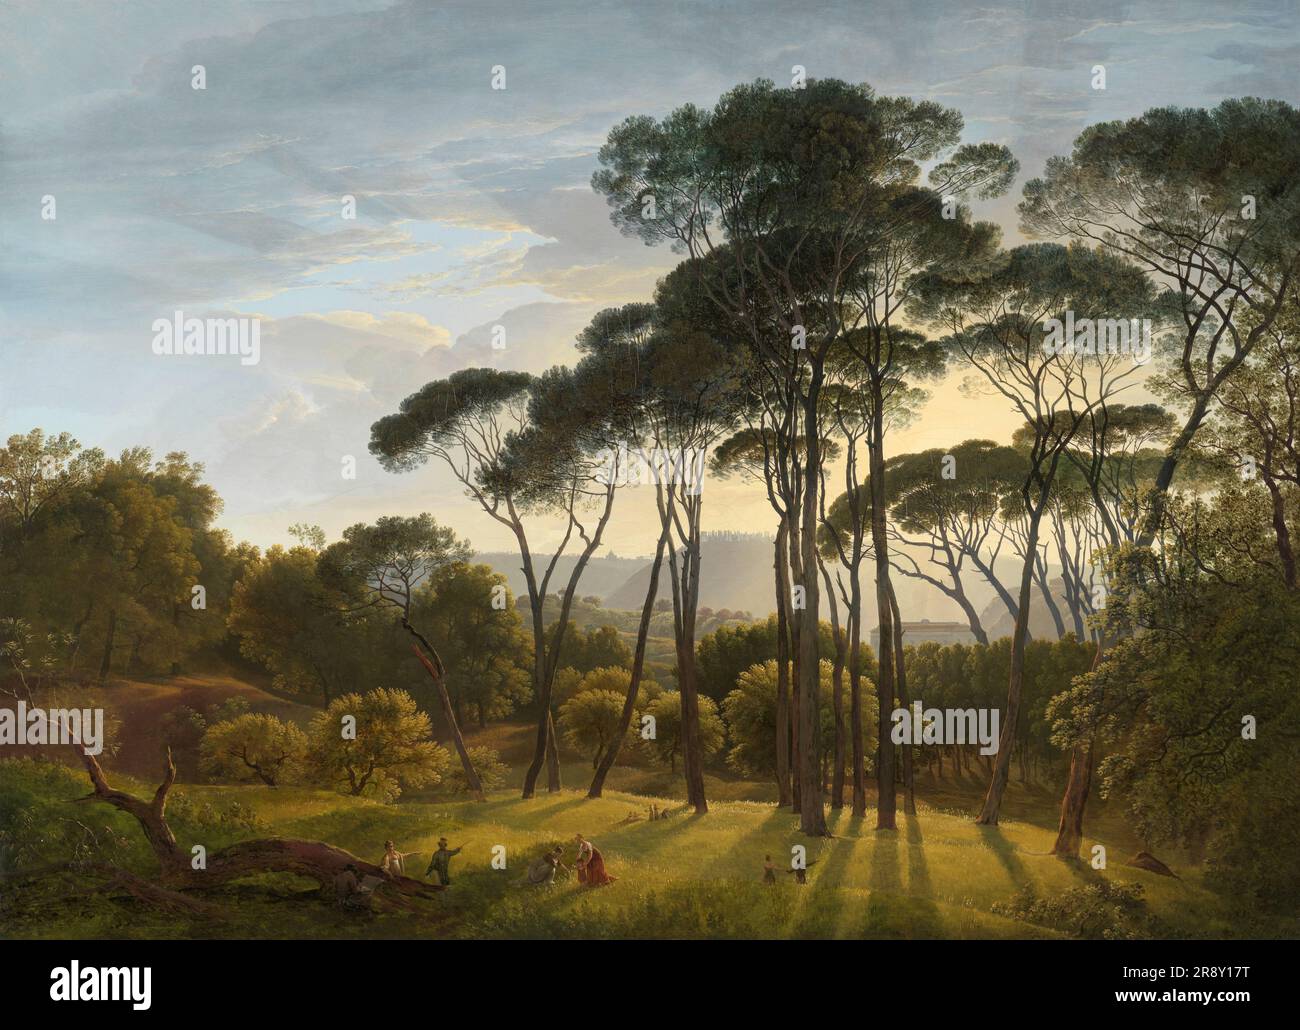 Italian Landscape with Umbrella Pines, 1807.  Voogd was known as the Dutch Claude, after the French painter Claude Lorrain, who was famous for his historical landscapes bathed in a golden glow. Voogd depicted the garden at Villa Borghese in Rome late in the afternoon: the sun casts long shadows and the trees stand out starkly against the sky. People are promenading, enjoying the wonderful sunset. In the foreground, an artist sits, leaning against a tree, sketching. Stock Photo